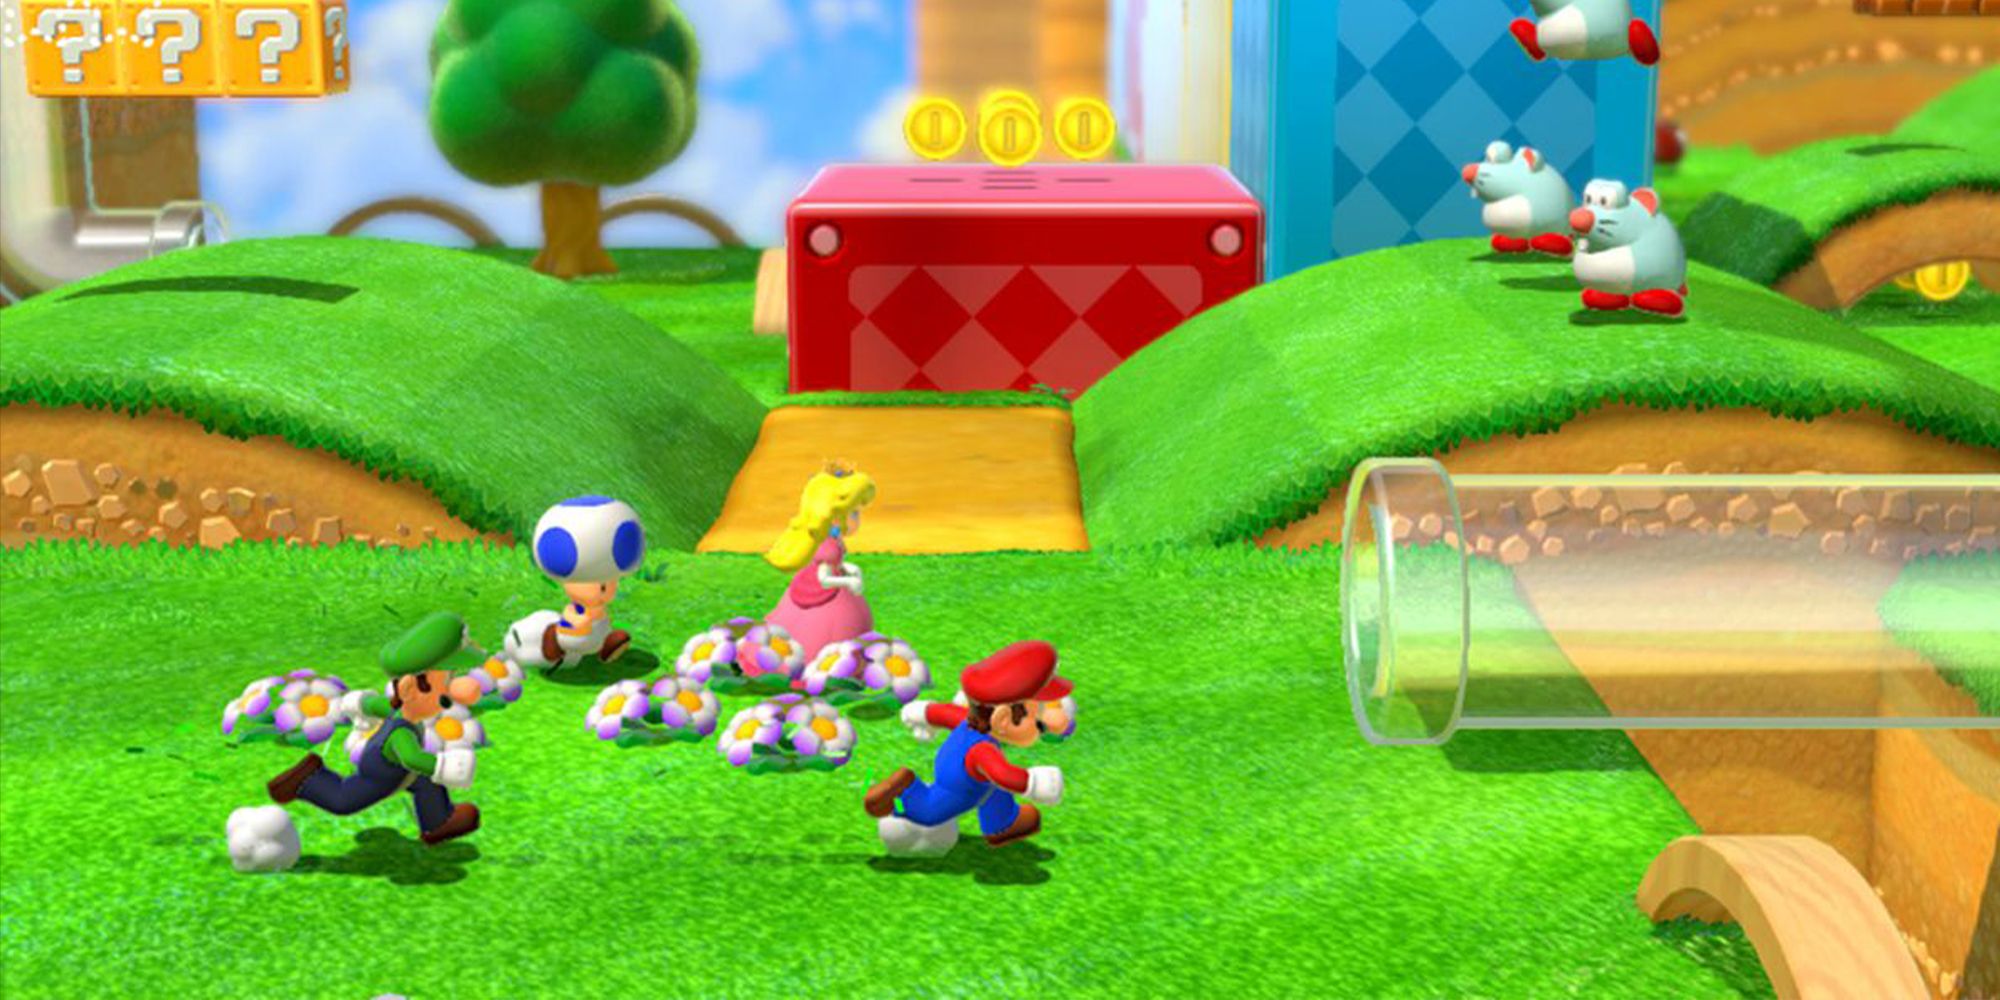 Super Mario 3D World: How To Set Up Online Multiplayer